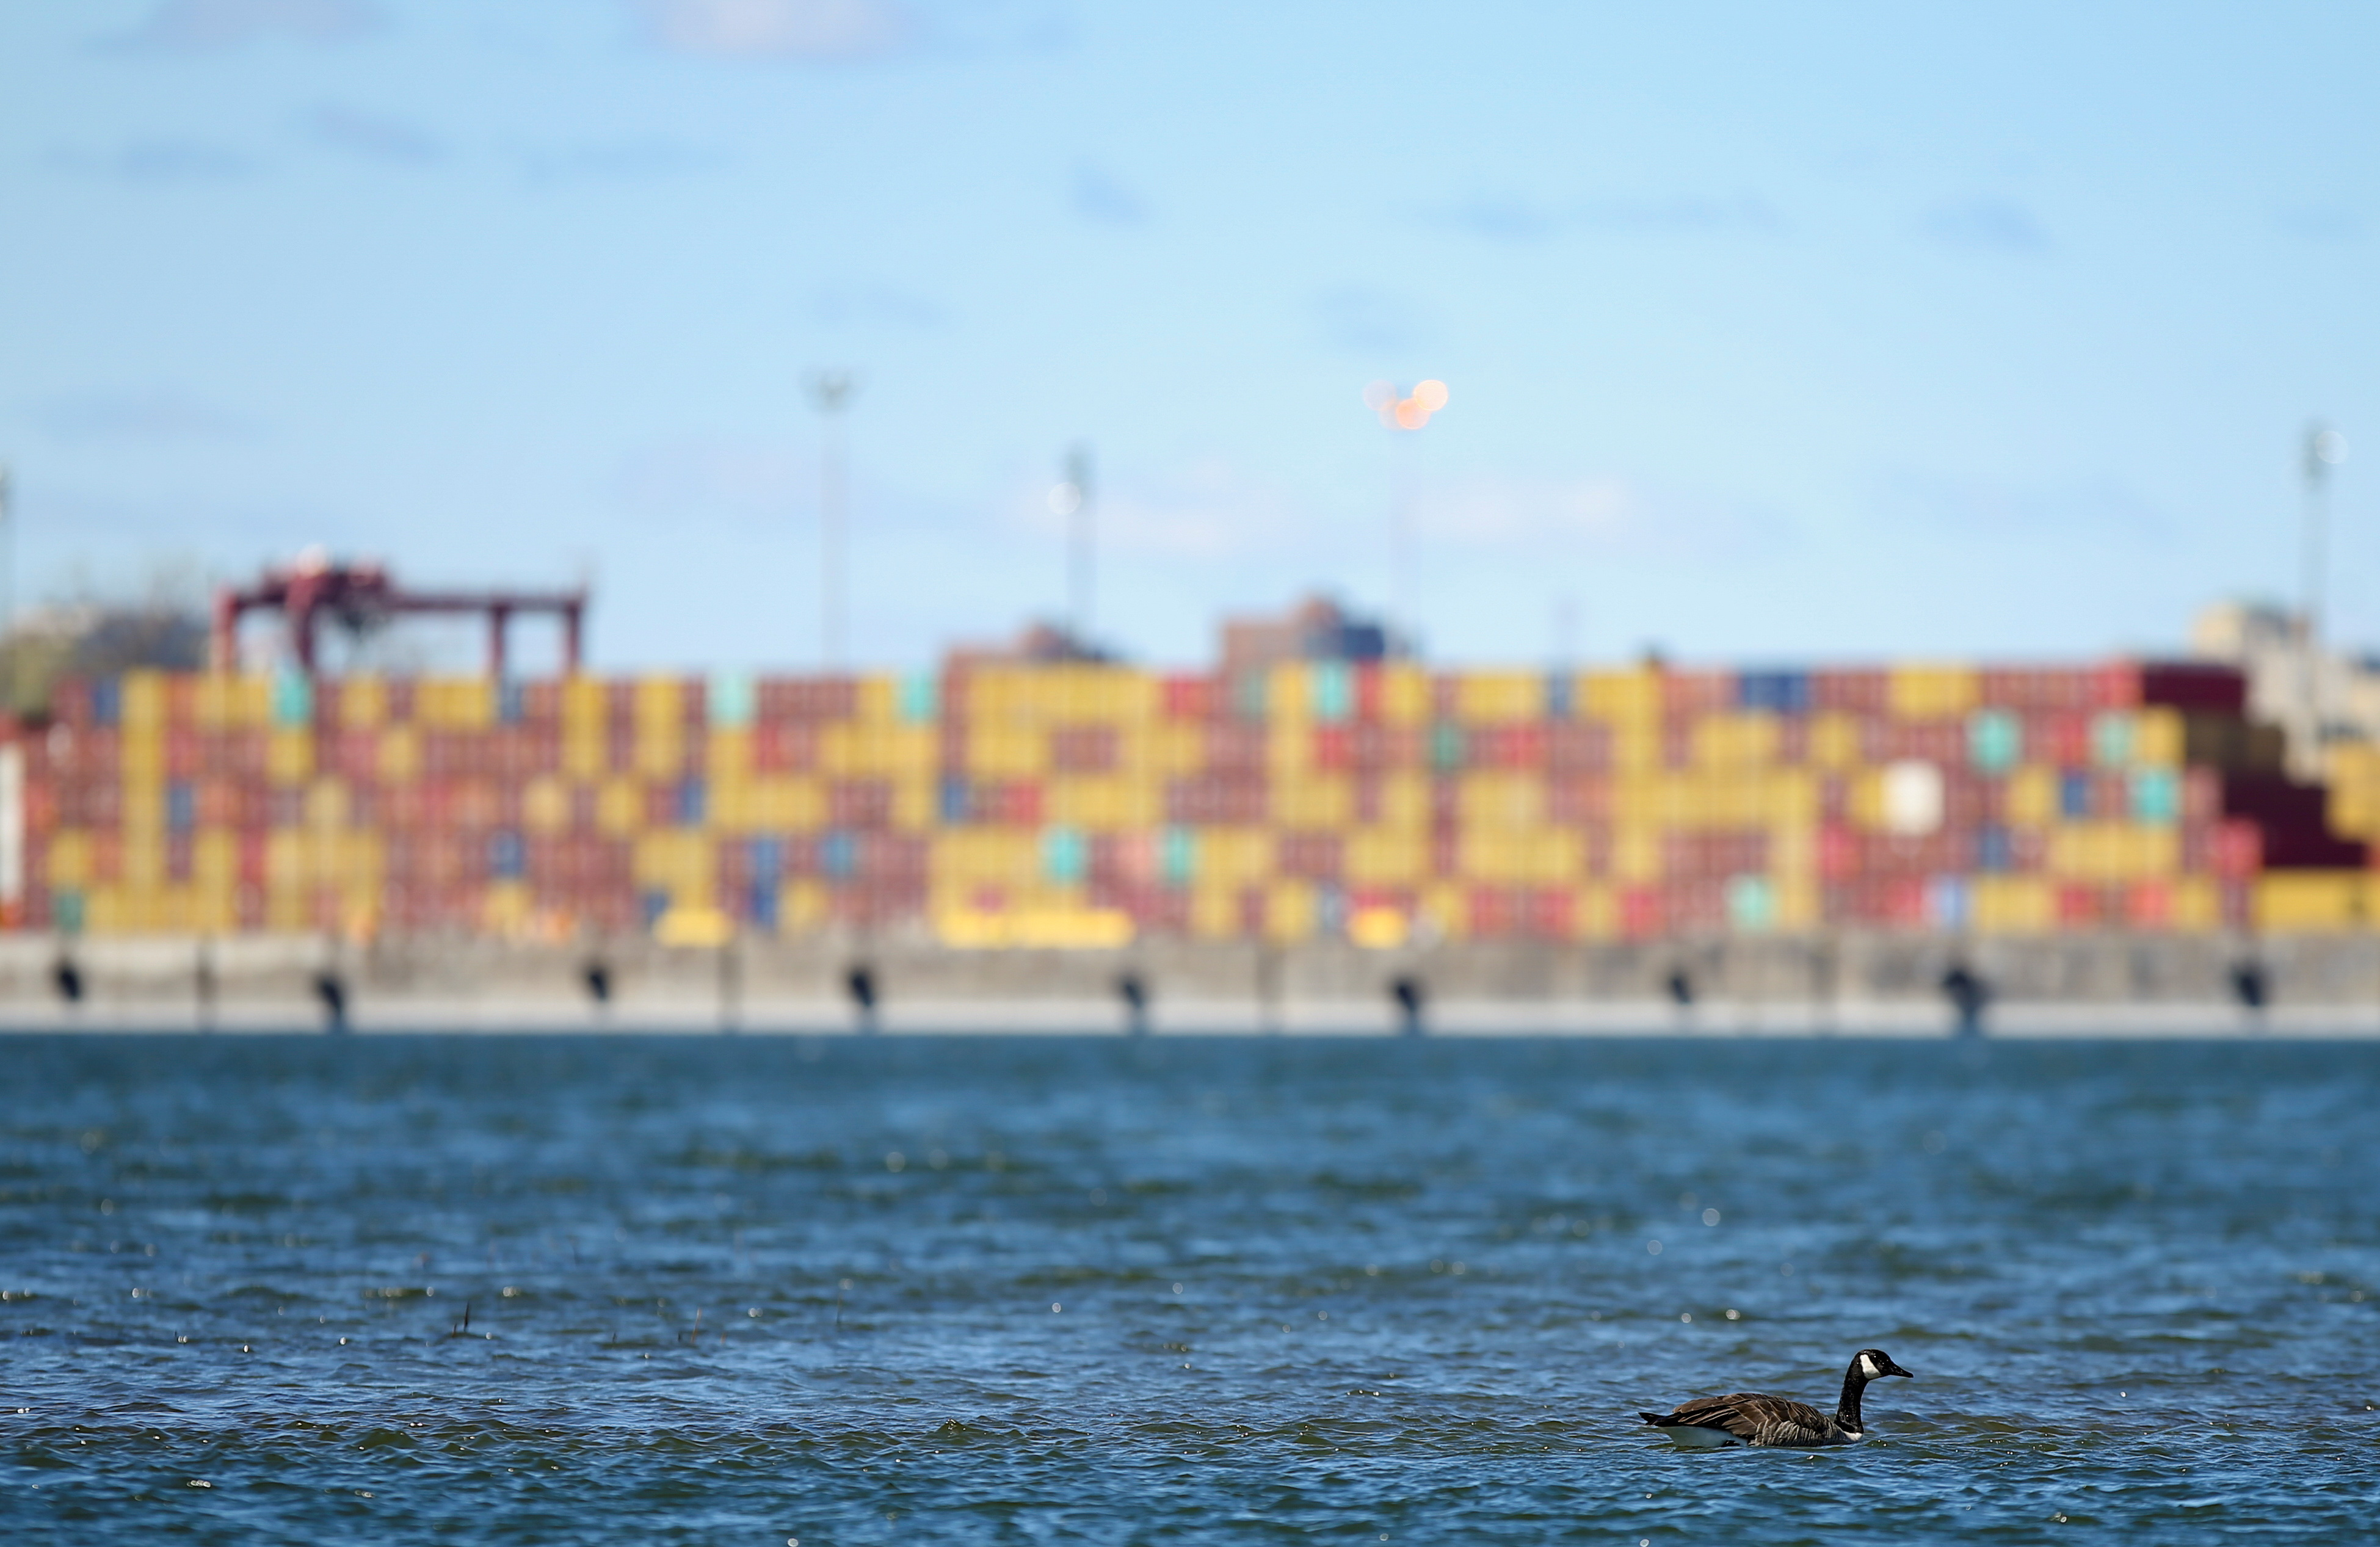 A goose swims in the St. Lawrence River across from the Port of Montreal in Montreal, Quebec